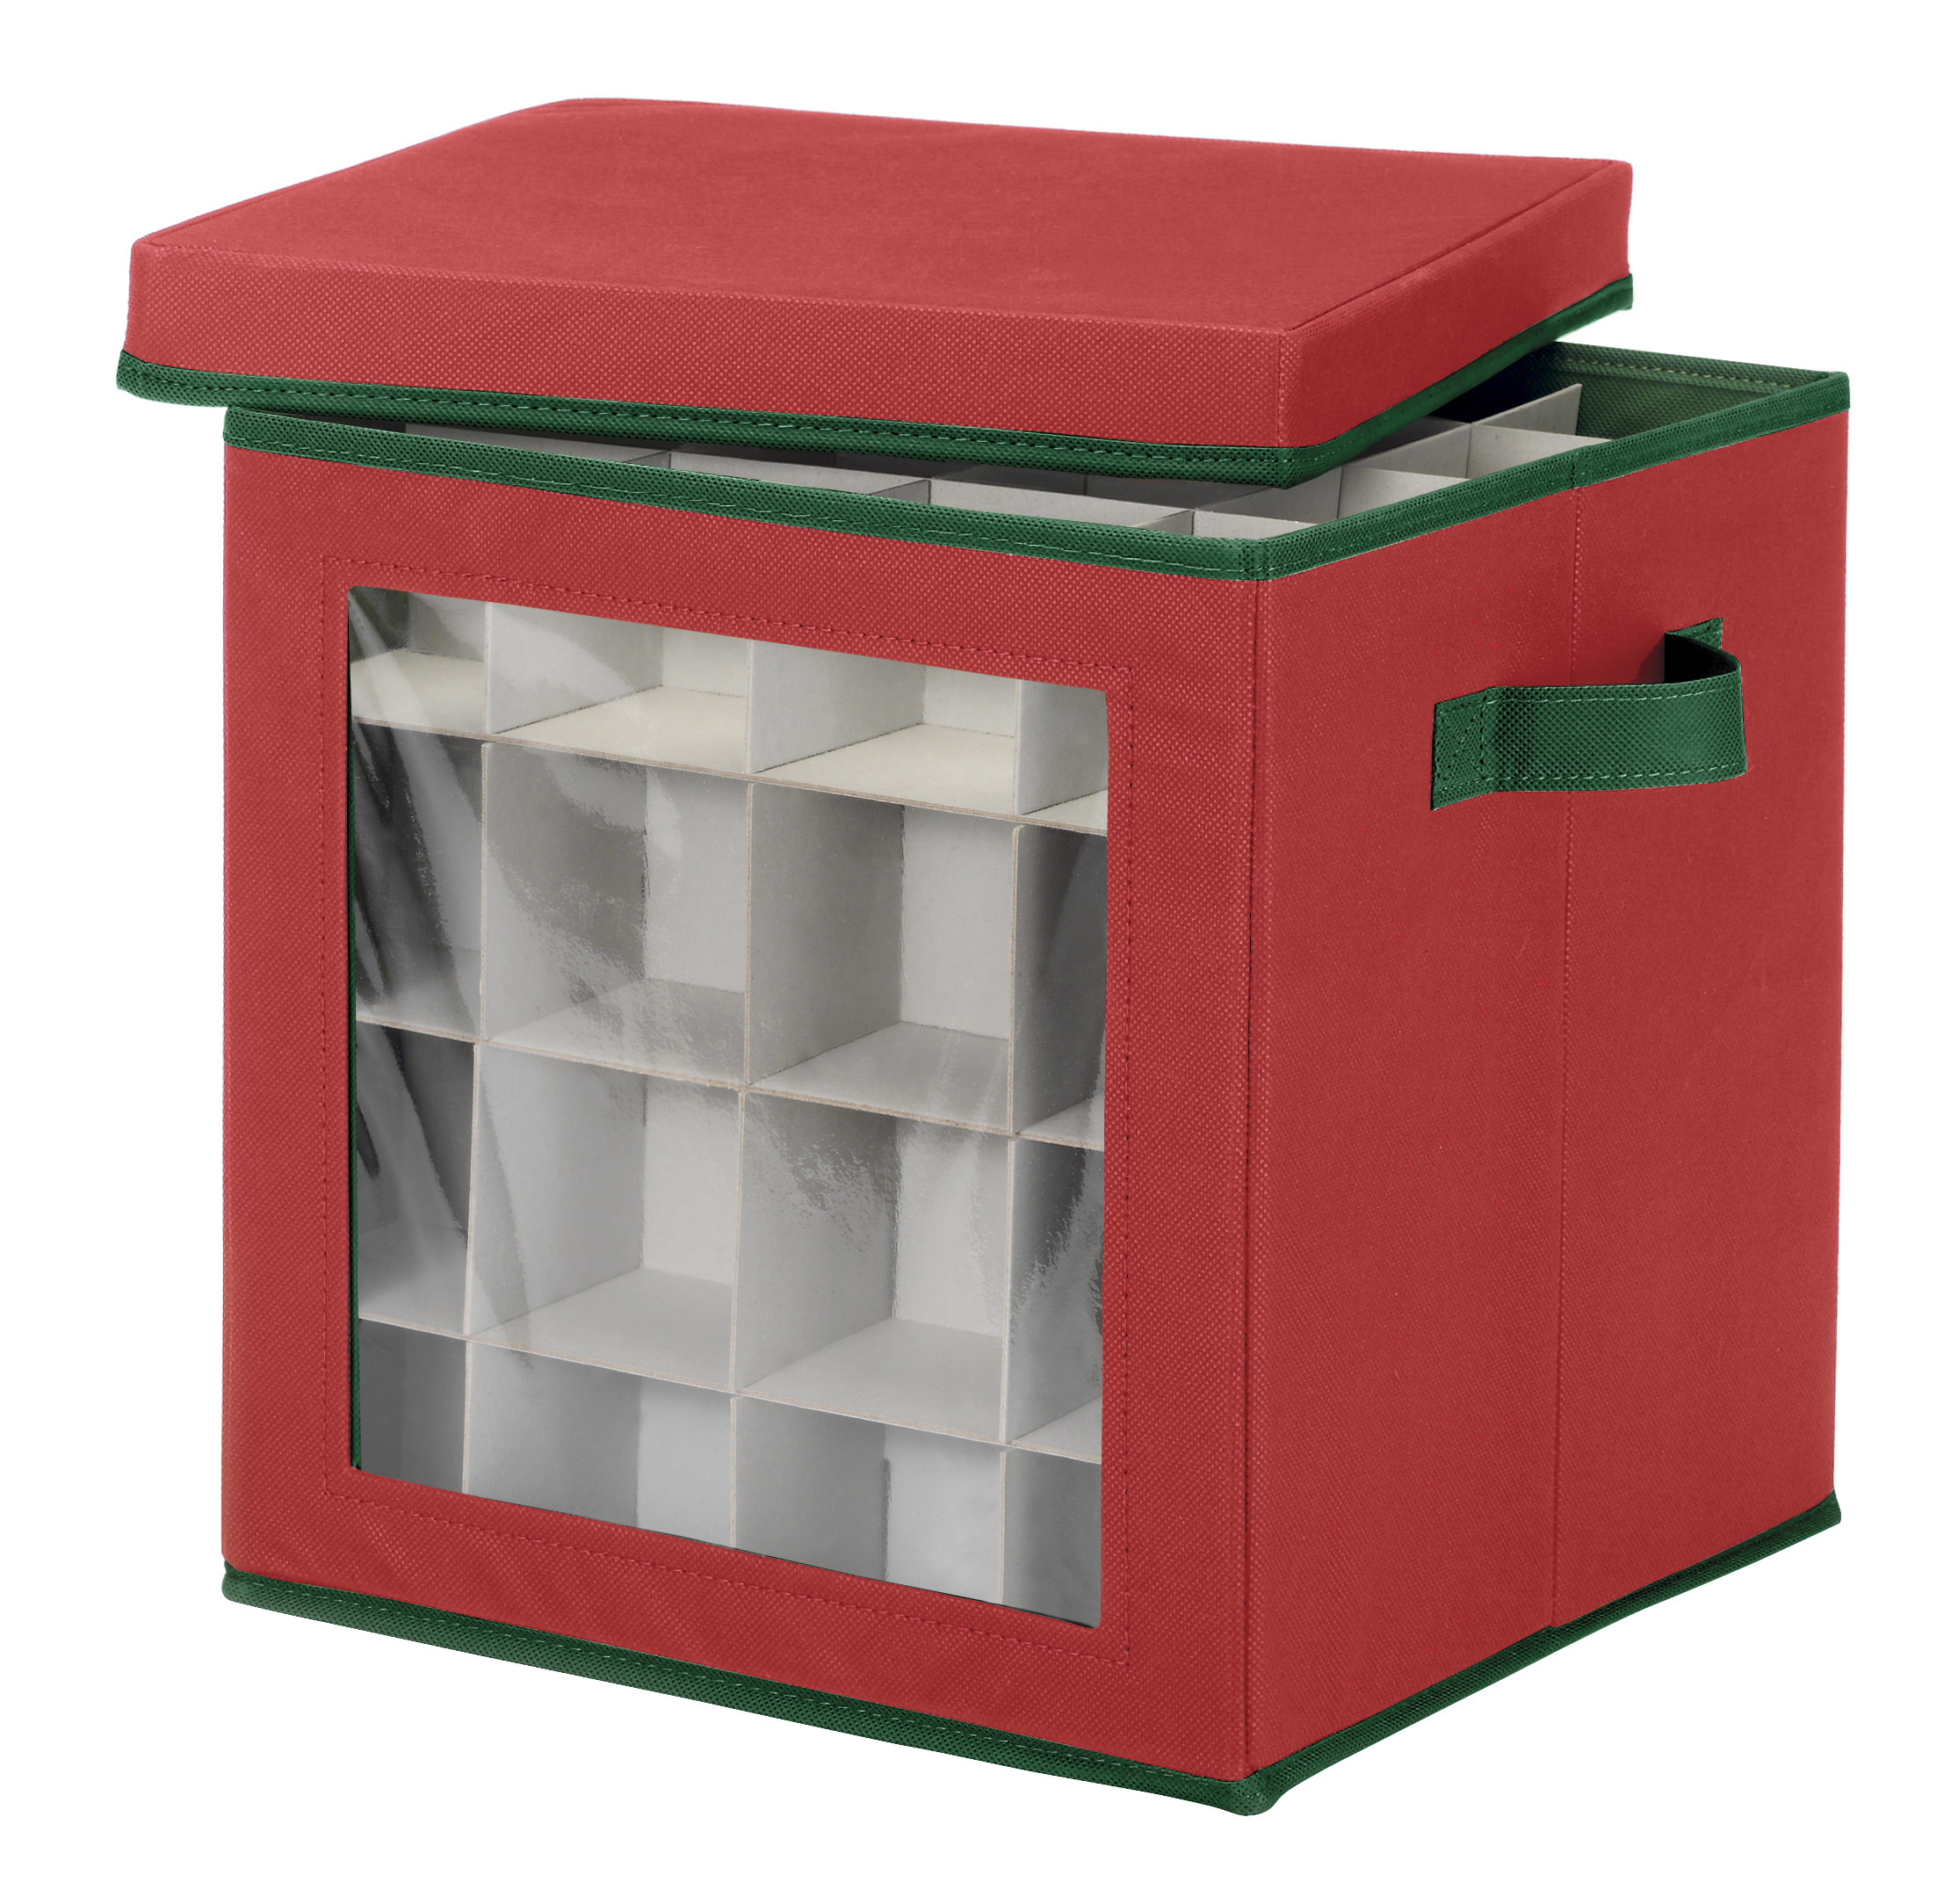 Whitmor Ornament Storage Cube - 64 Compartments - PPNW Red - 12" x 12" x 12" for Adult Use - image 3 of 7